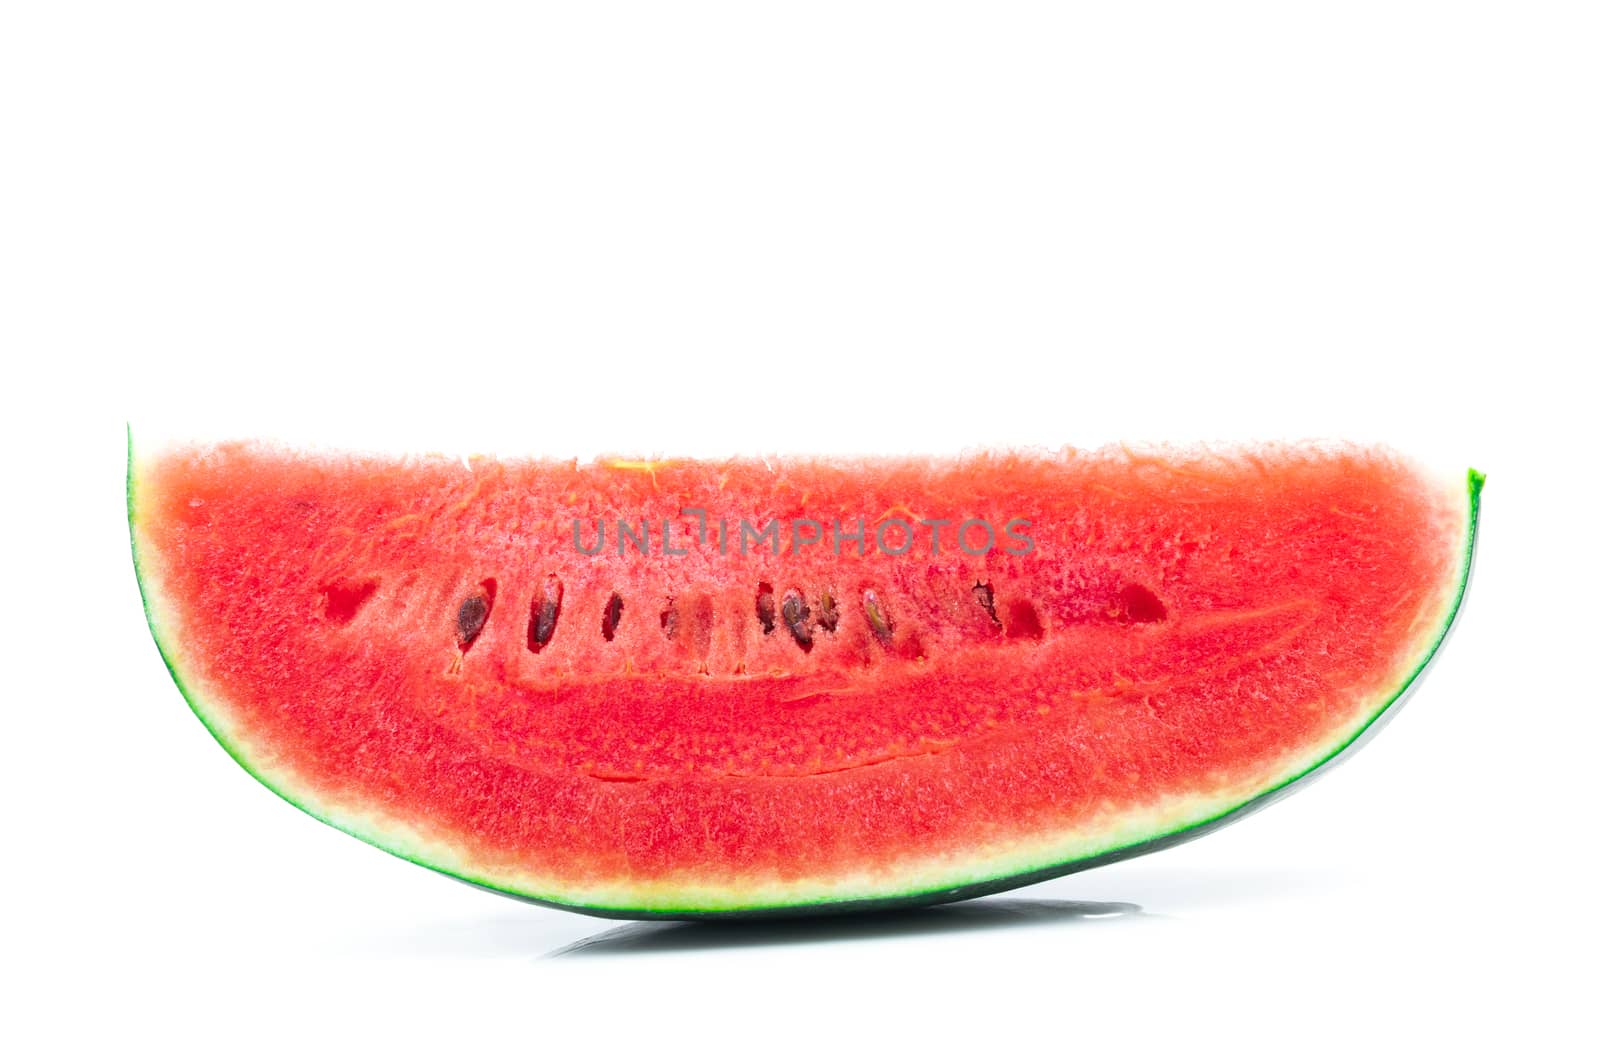 Fresh watermelon on a white background by sompongtom